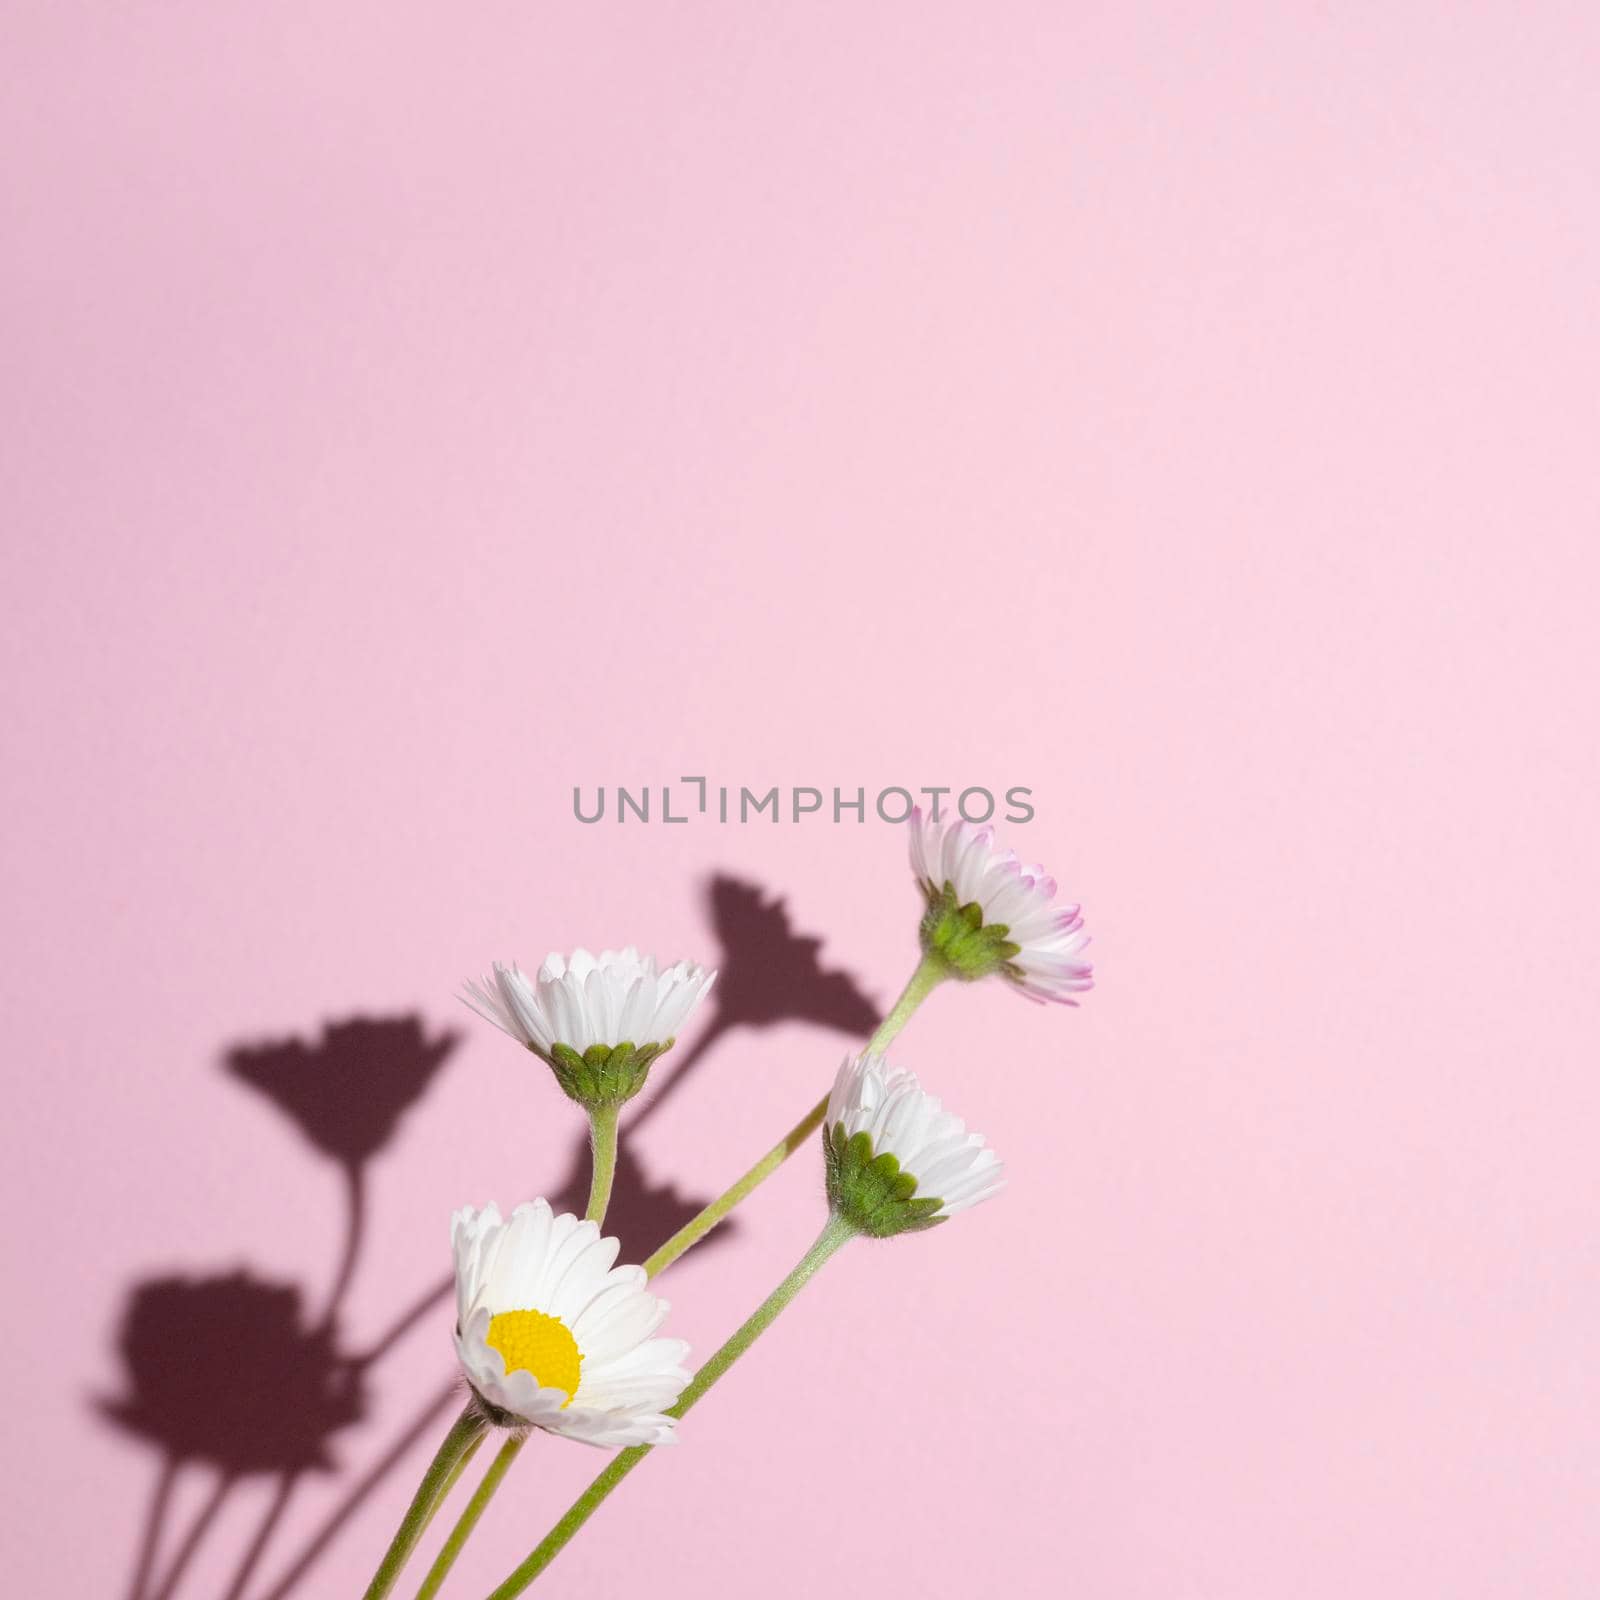 some daisies with their hard shadow on a pink background